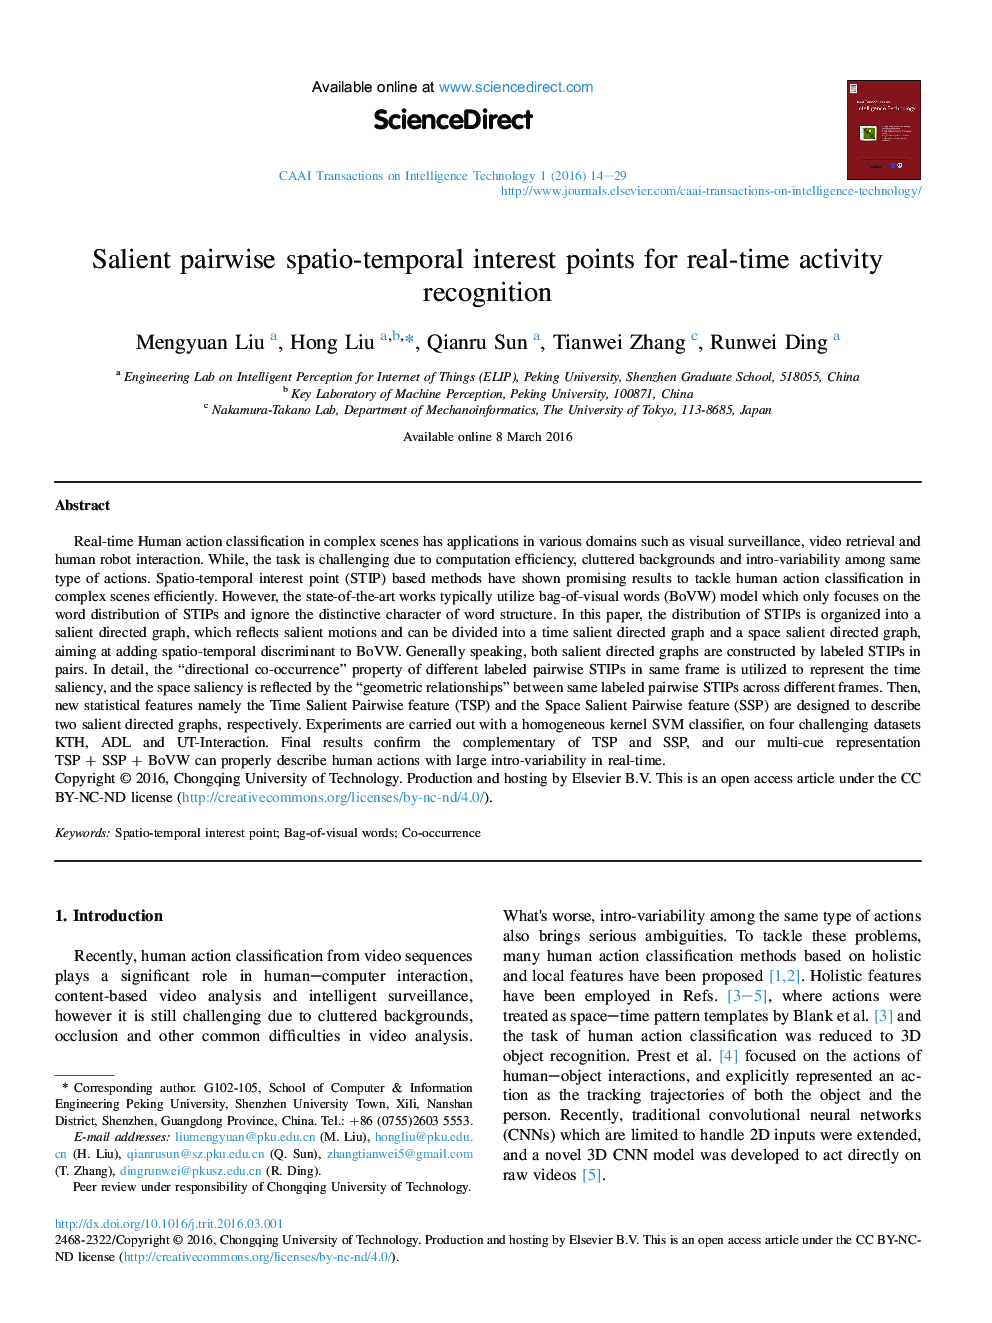 Salient pairwise spatio-temporal interest points for real-time activity recognition 